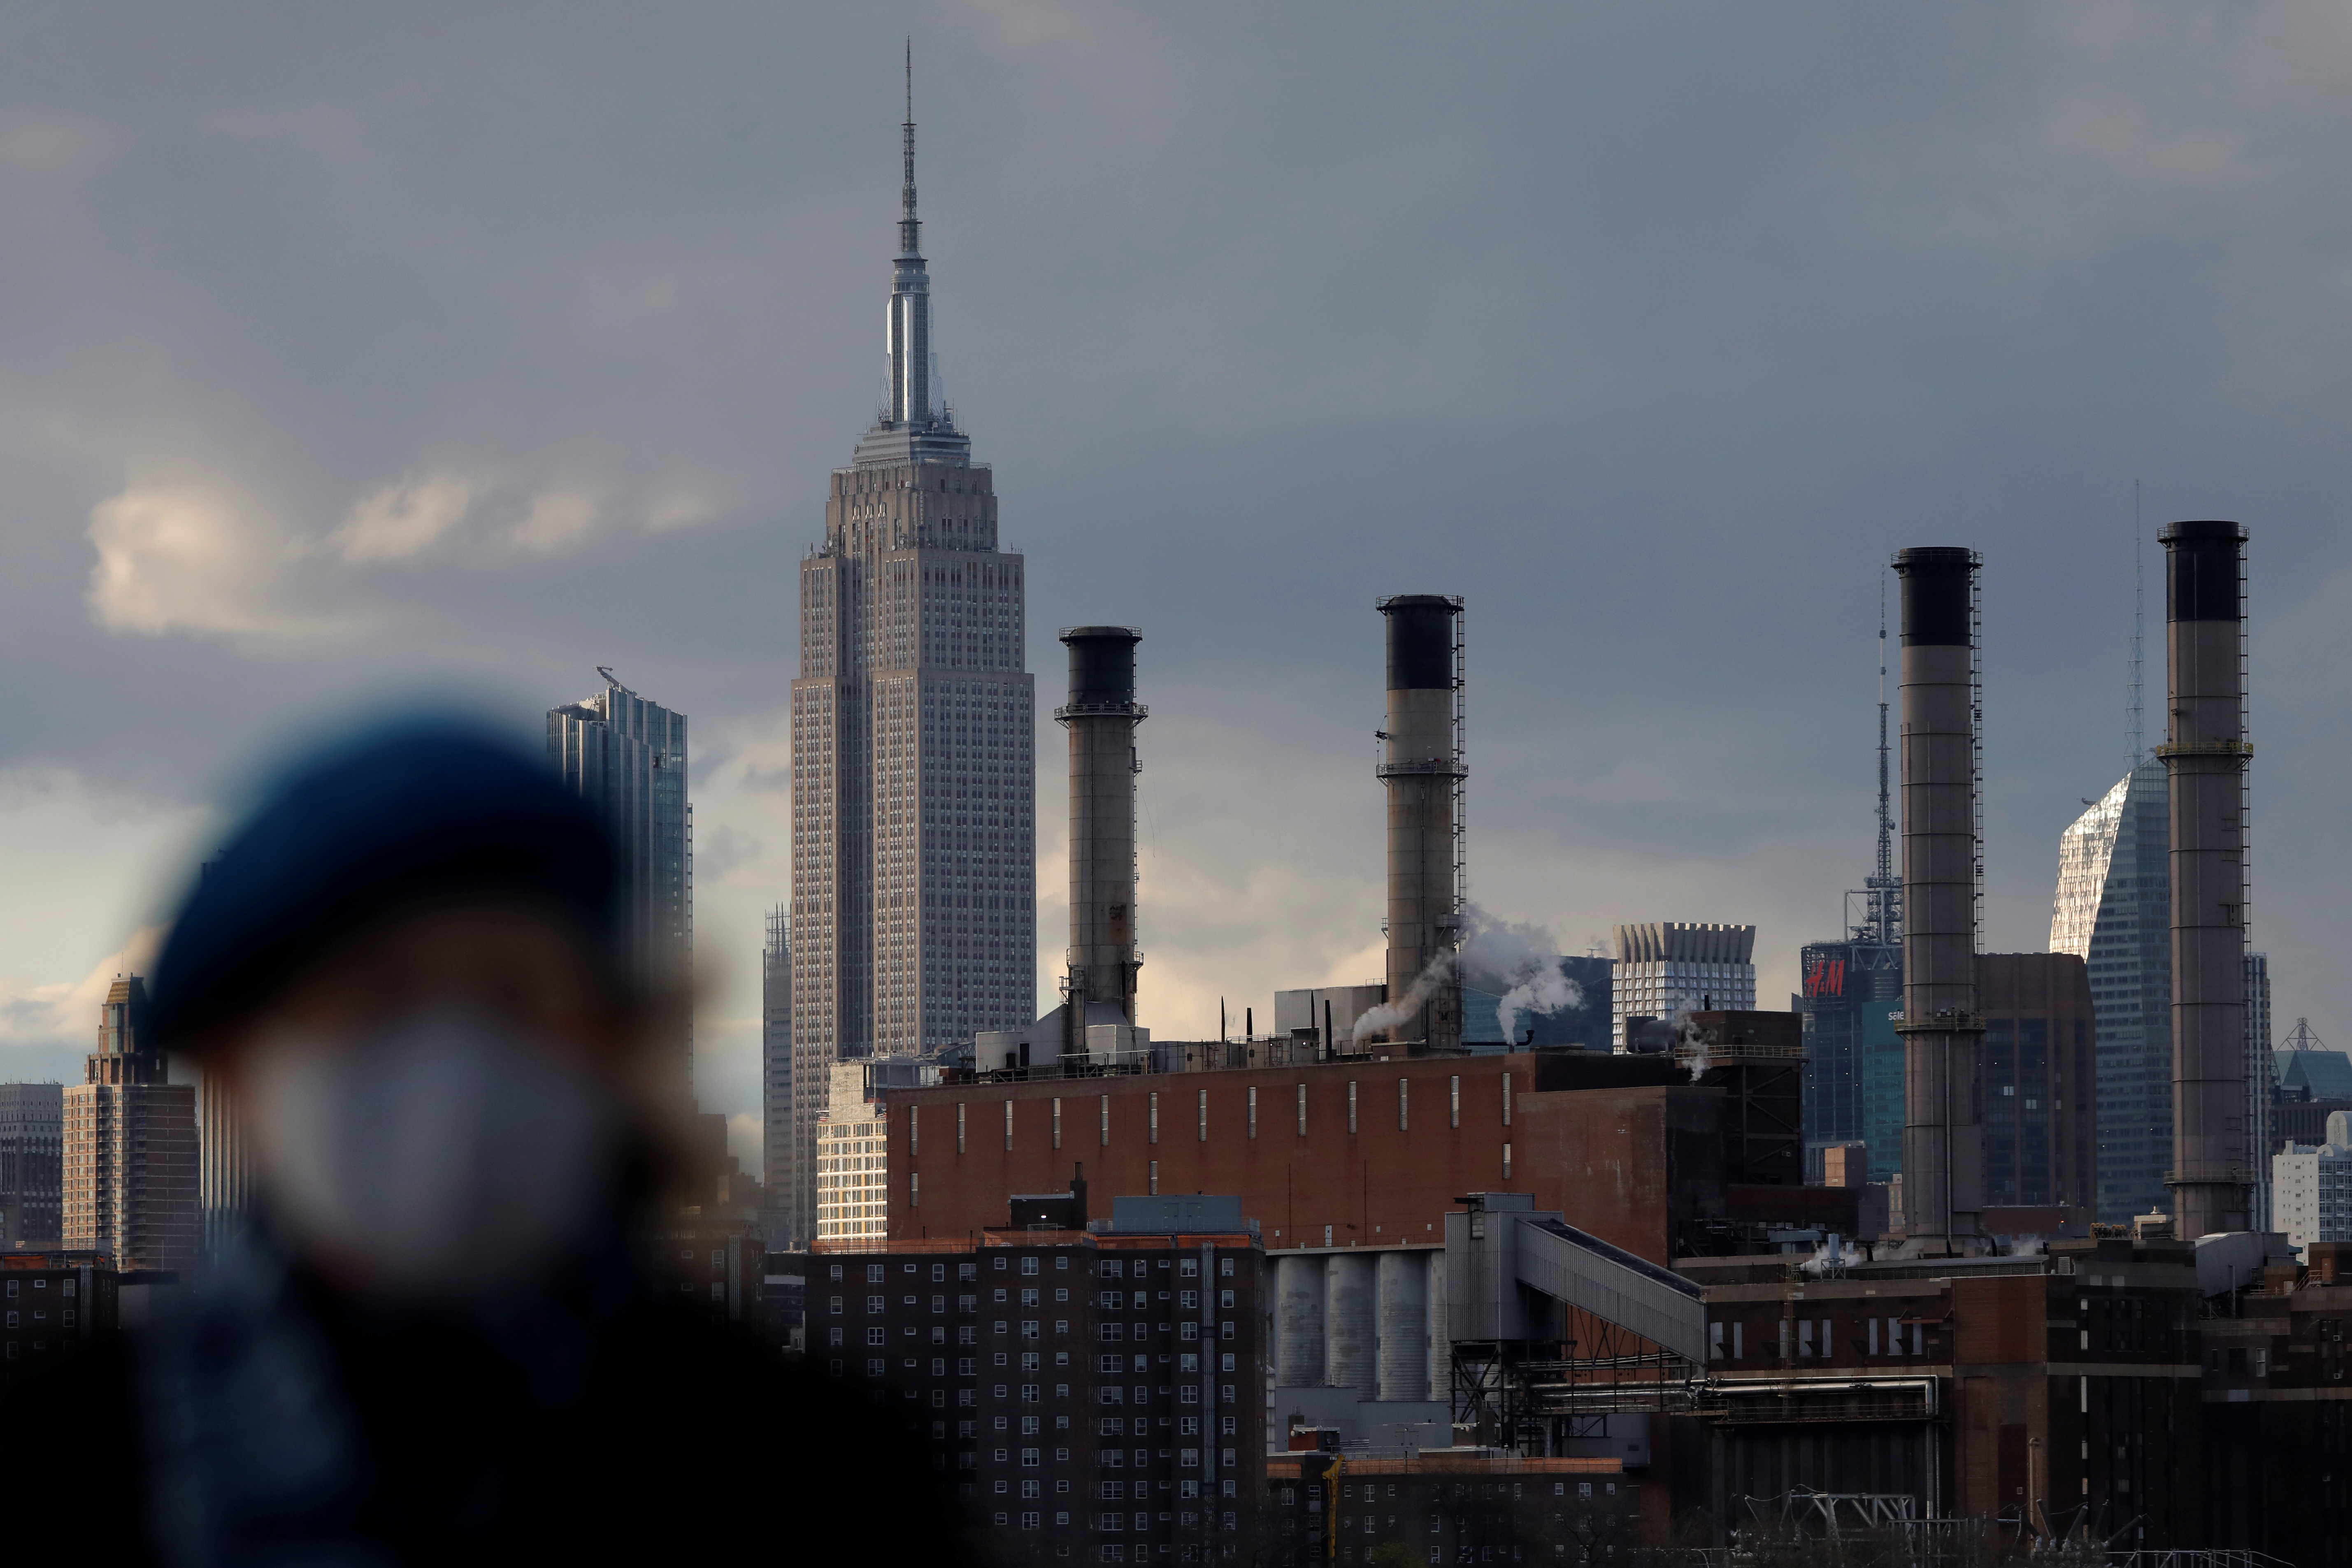 A person walks in front of the Con Edison power generating plant in Manhattan, New York City, New York